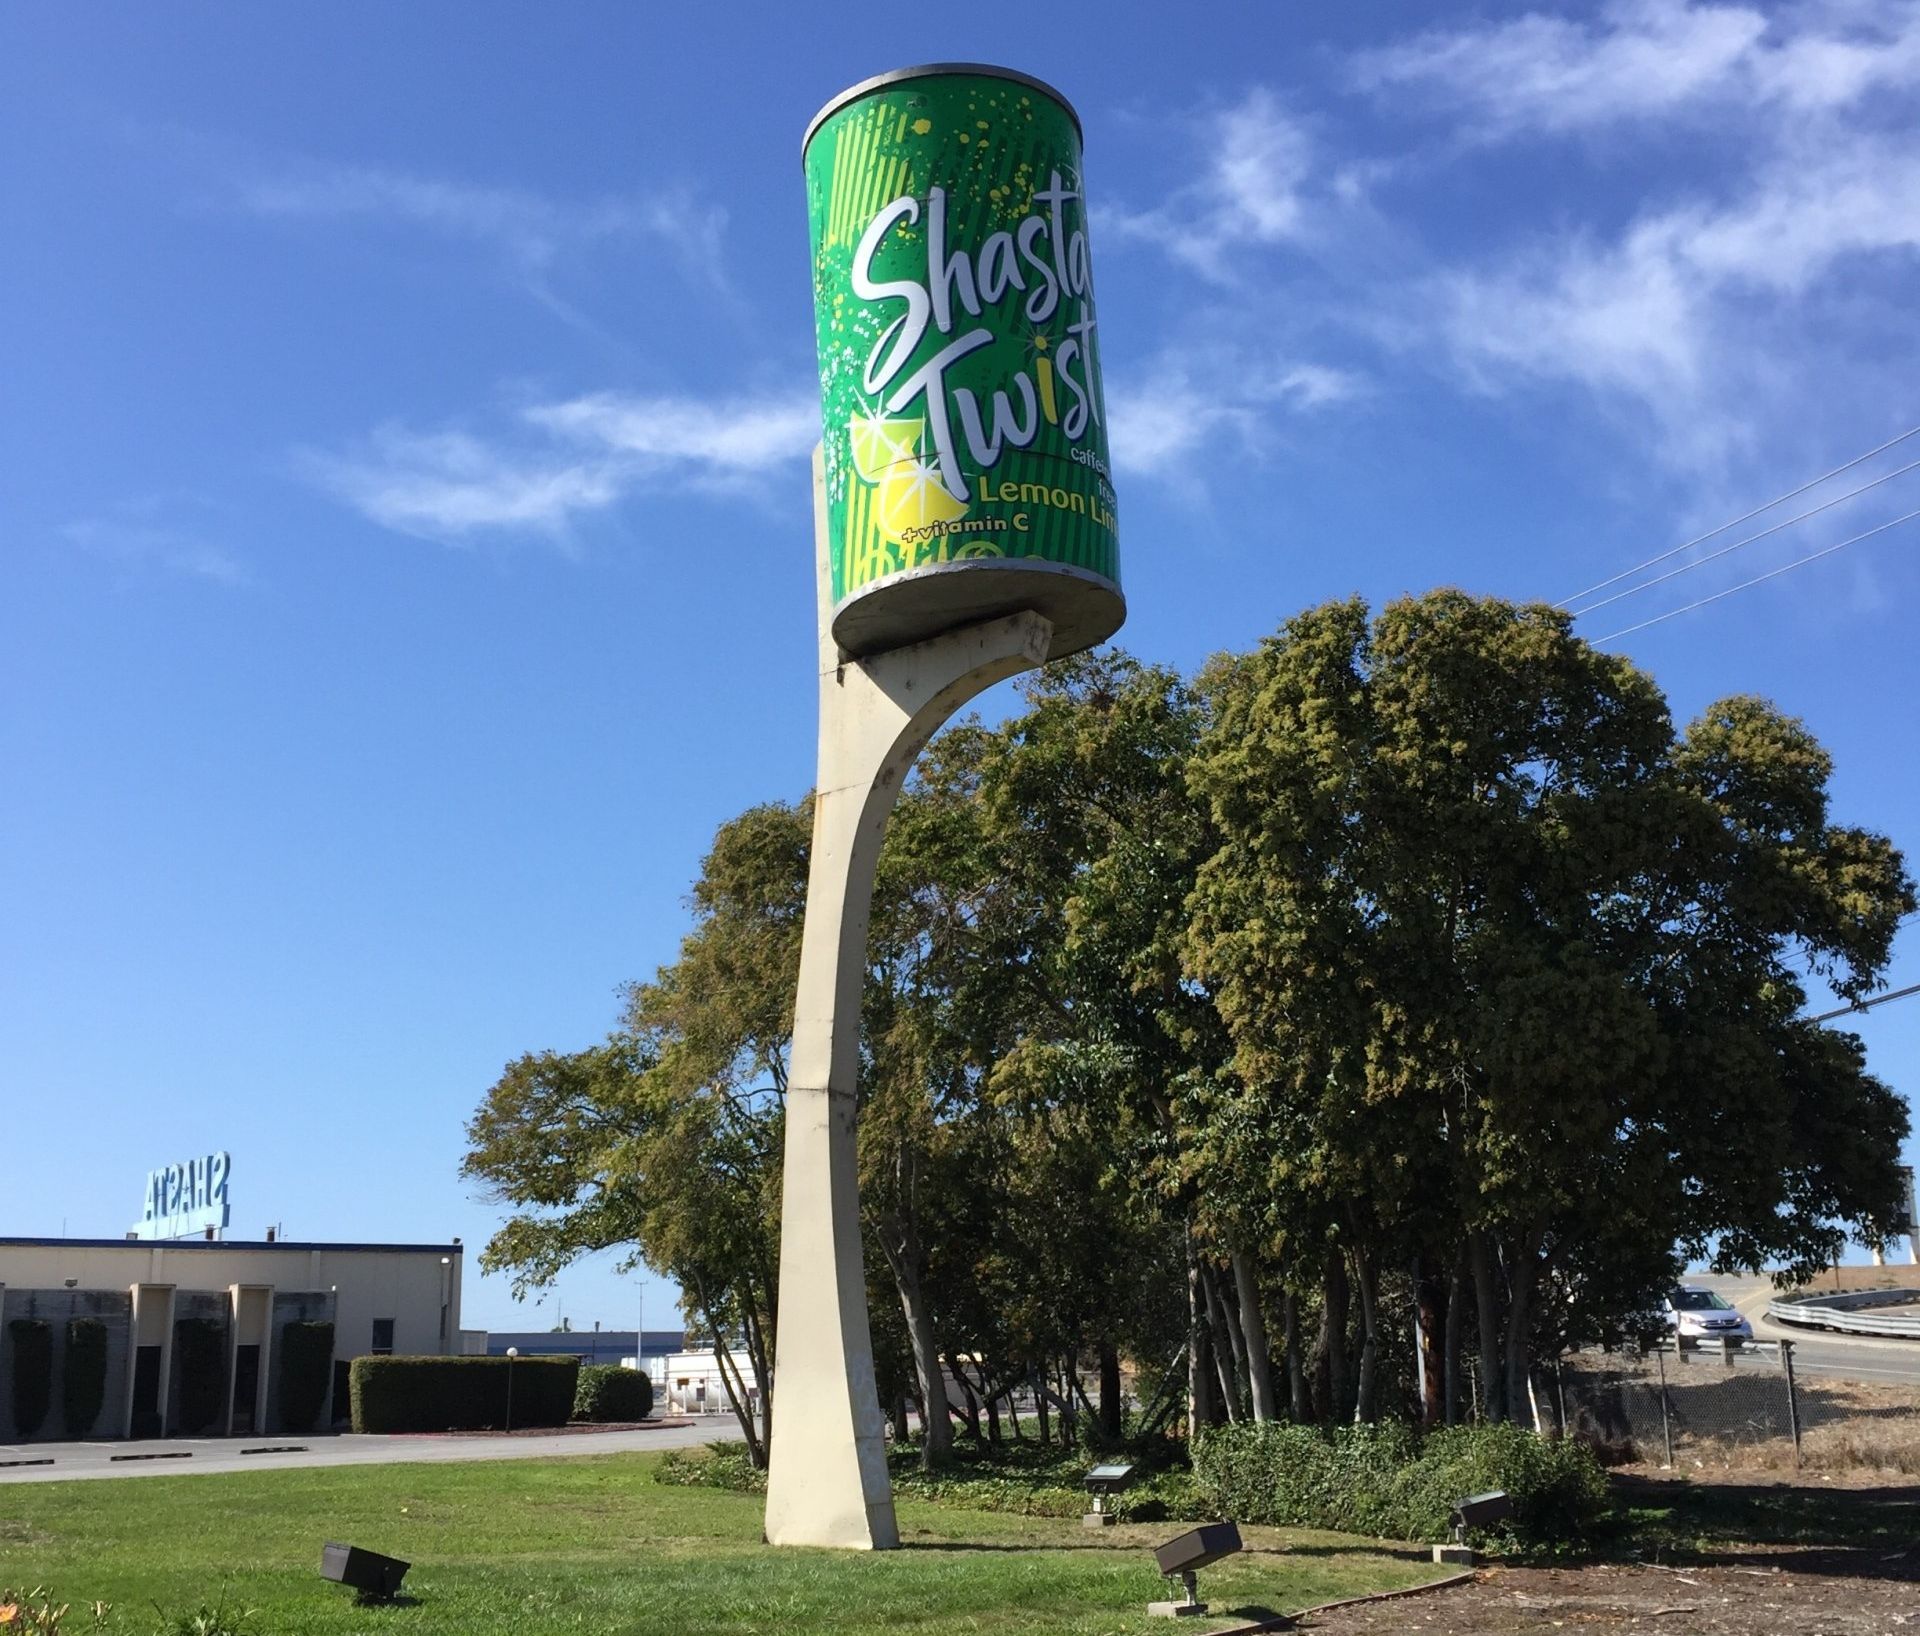 World's Largest Shasta Soda Can Sculptures: world records in Hayward, California